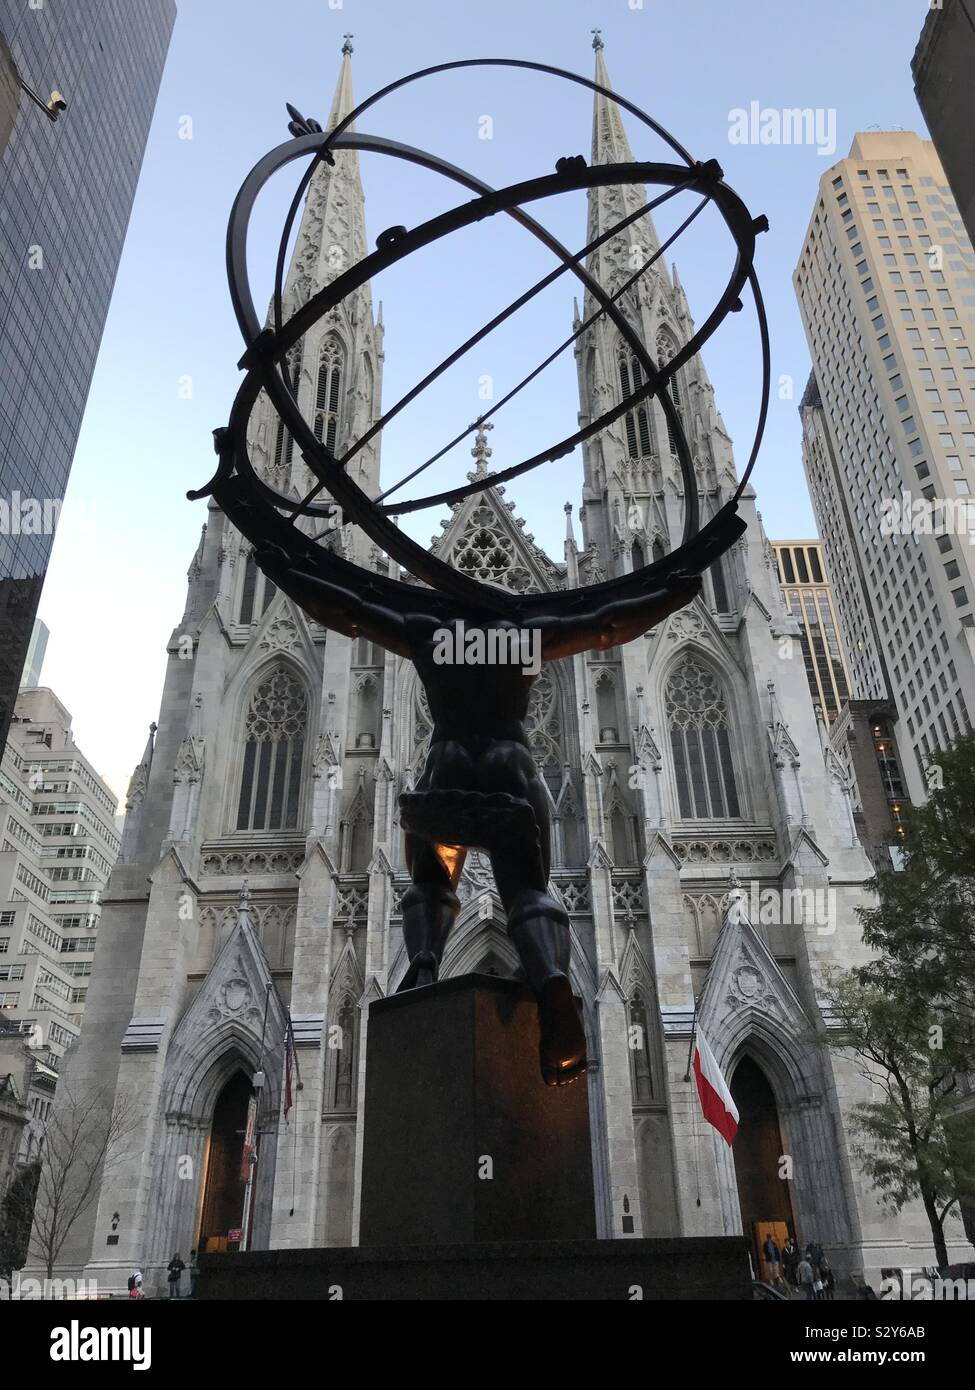 Atlas Statue at Rockefeller Center in front of St Patrick’s Cathedral, New York Stock Photo